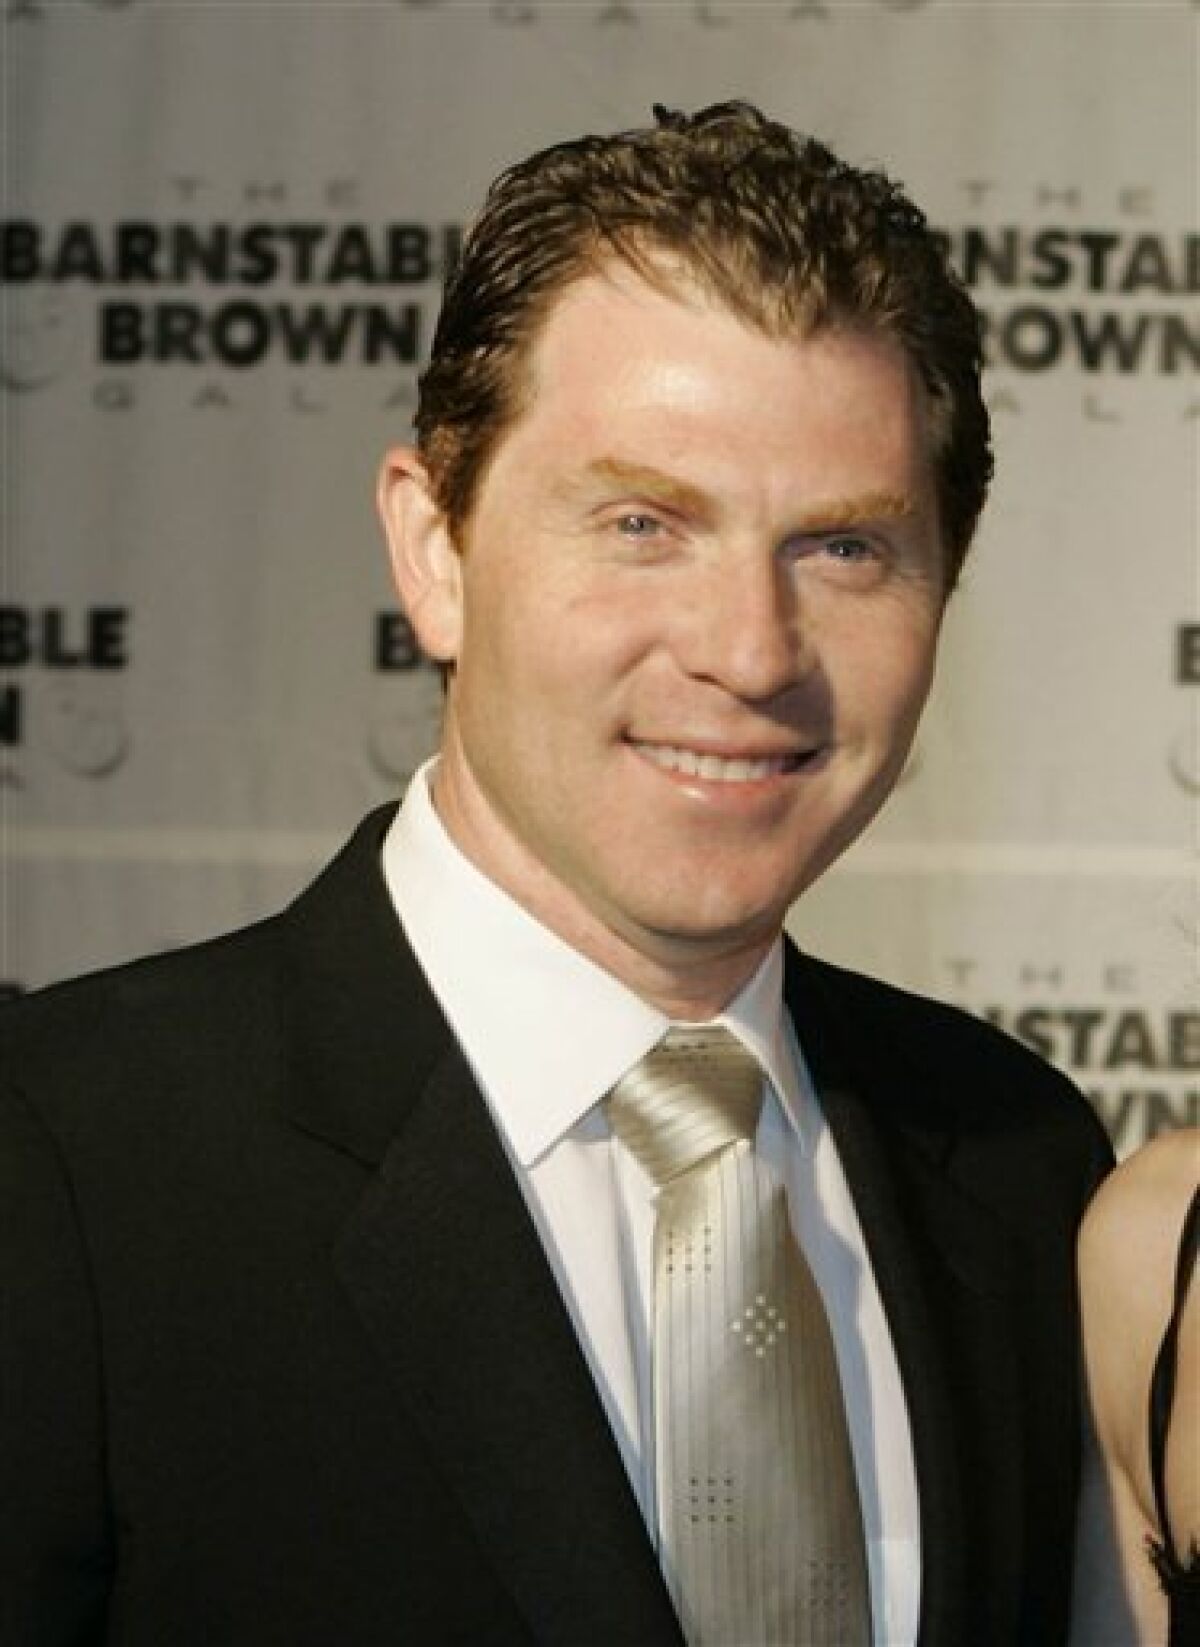 In this May 2, 2008 file photo Bobby Flay arrives at the Barnstable Brown Derby party in Louisville, Ky. (AP Photo/Darron Cummings, file)